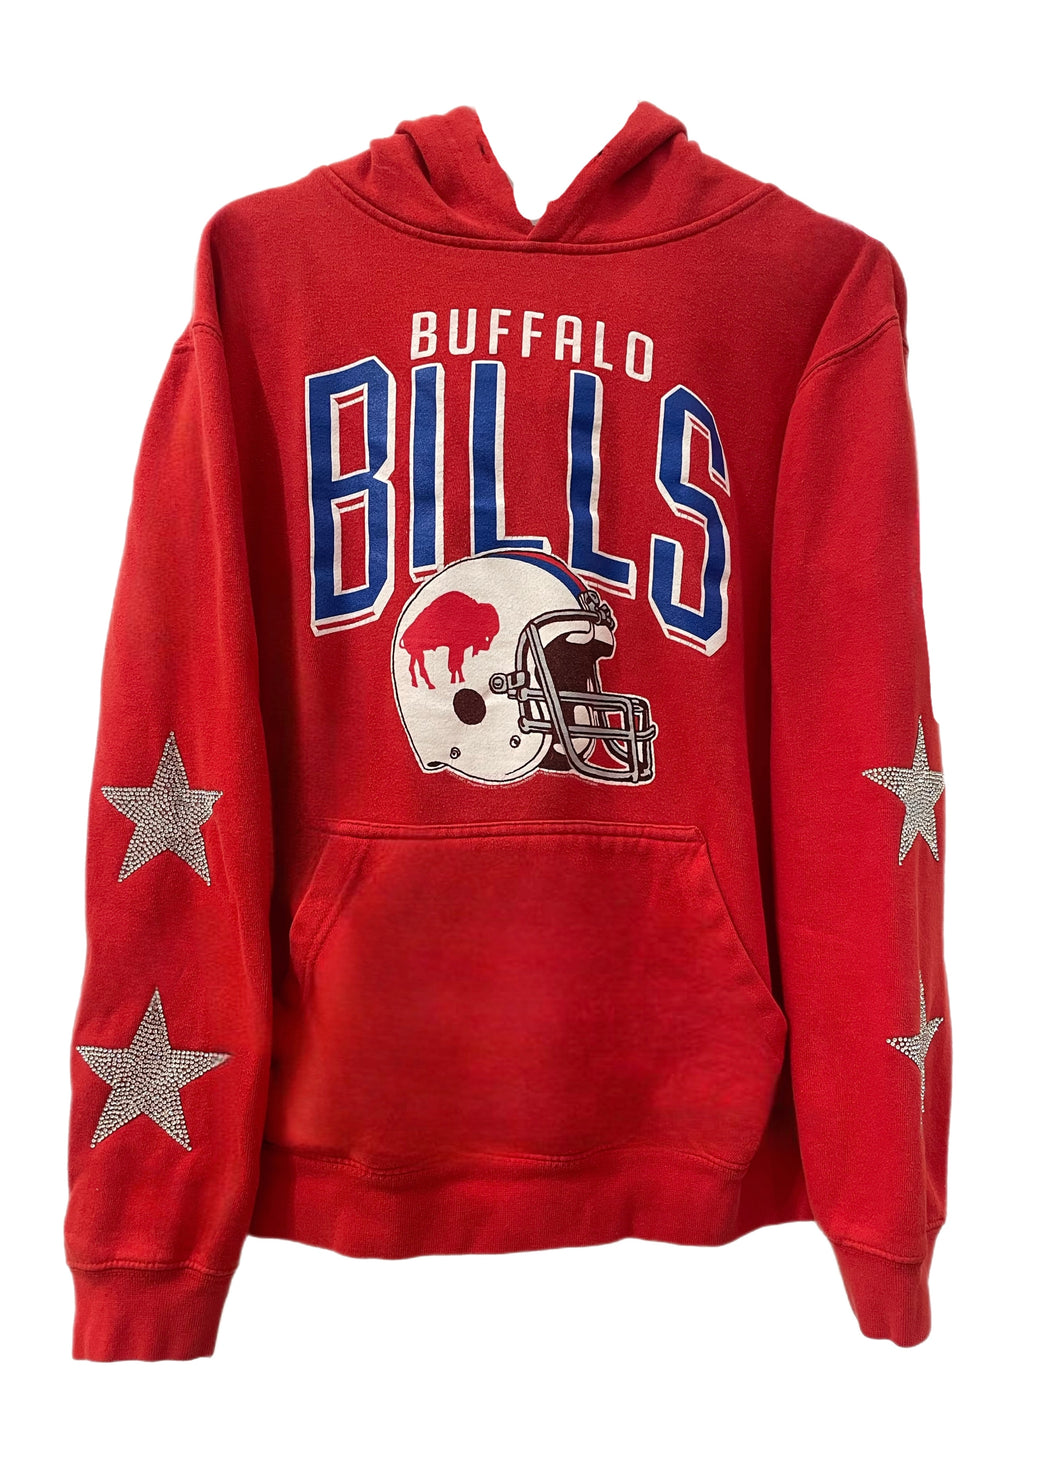 Buffalo Bills, NFL One of a KIND Vintage Hoodie with Crystal Star Design